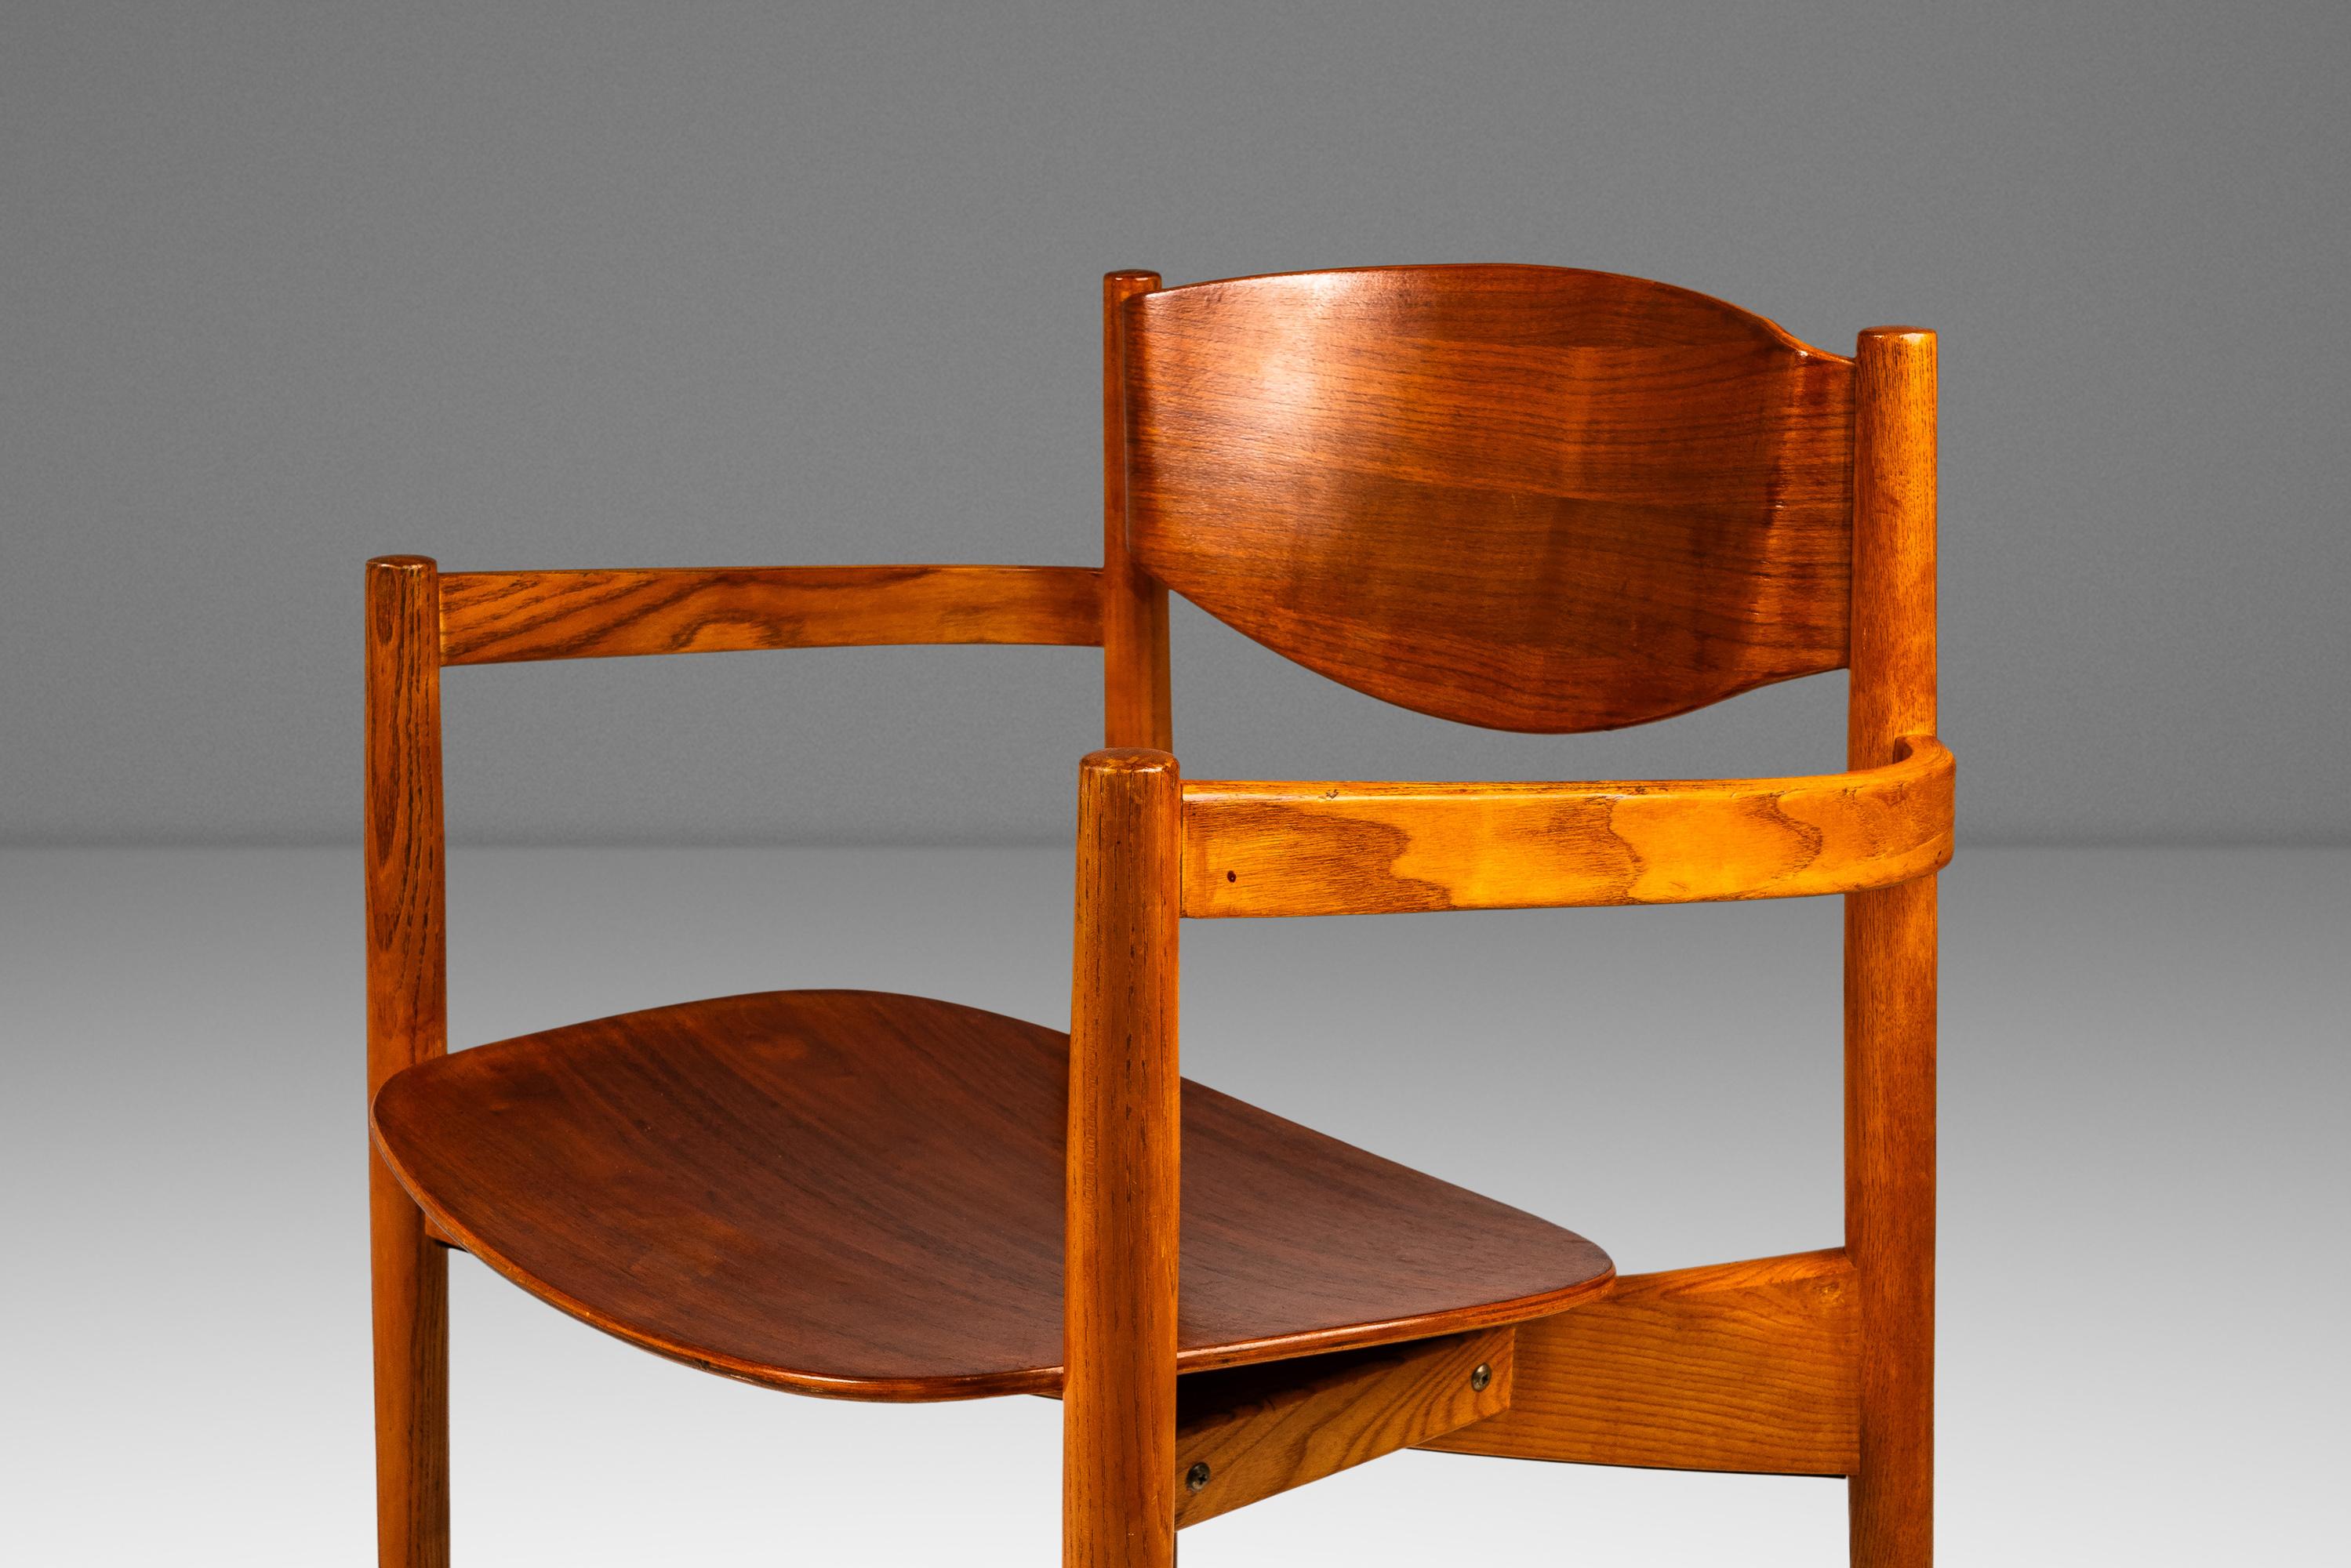 Set of 6 Stacking in Oak & Walnut Chairs by Jens Risom, USA, c. 1960s For Sale 10